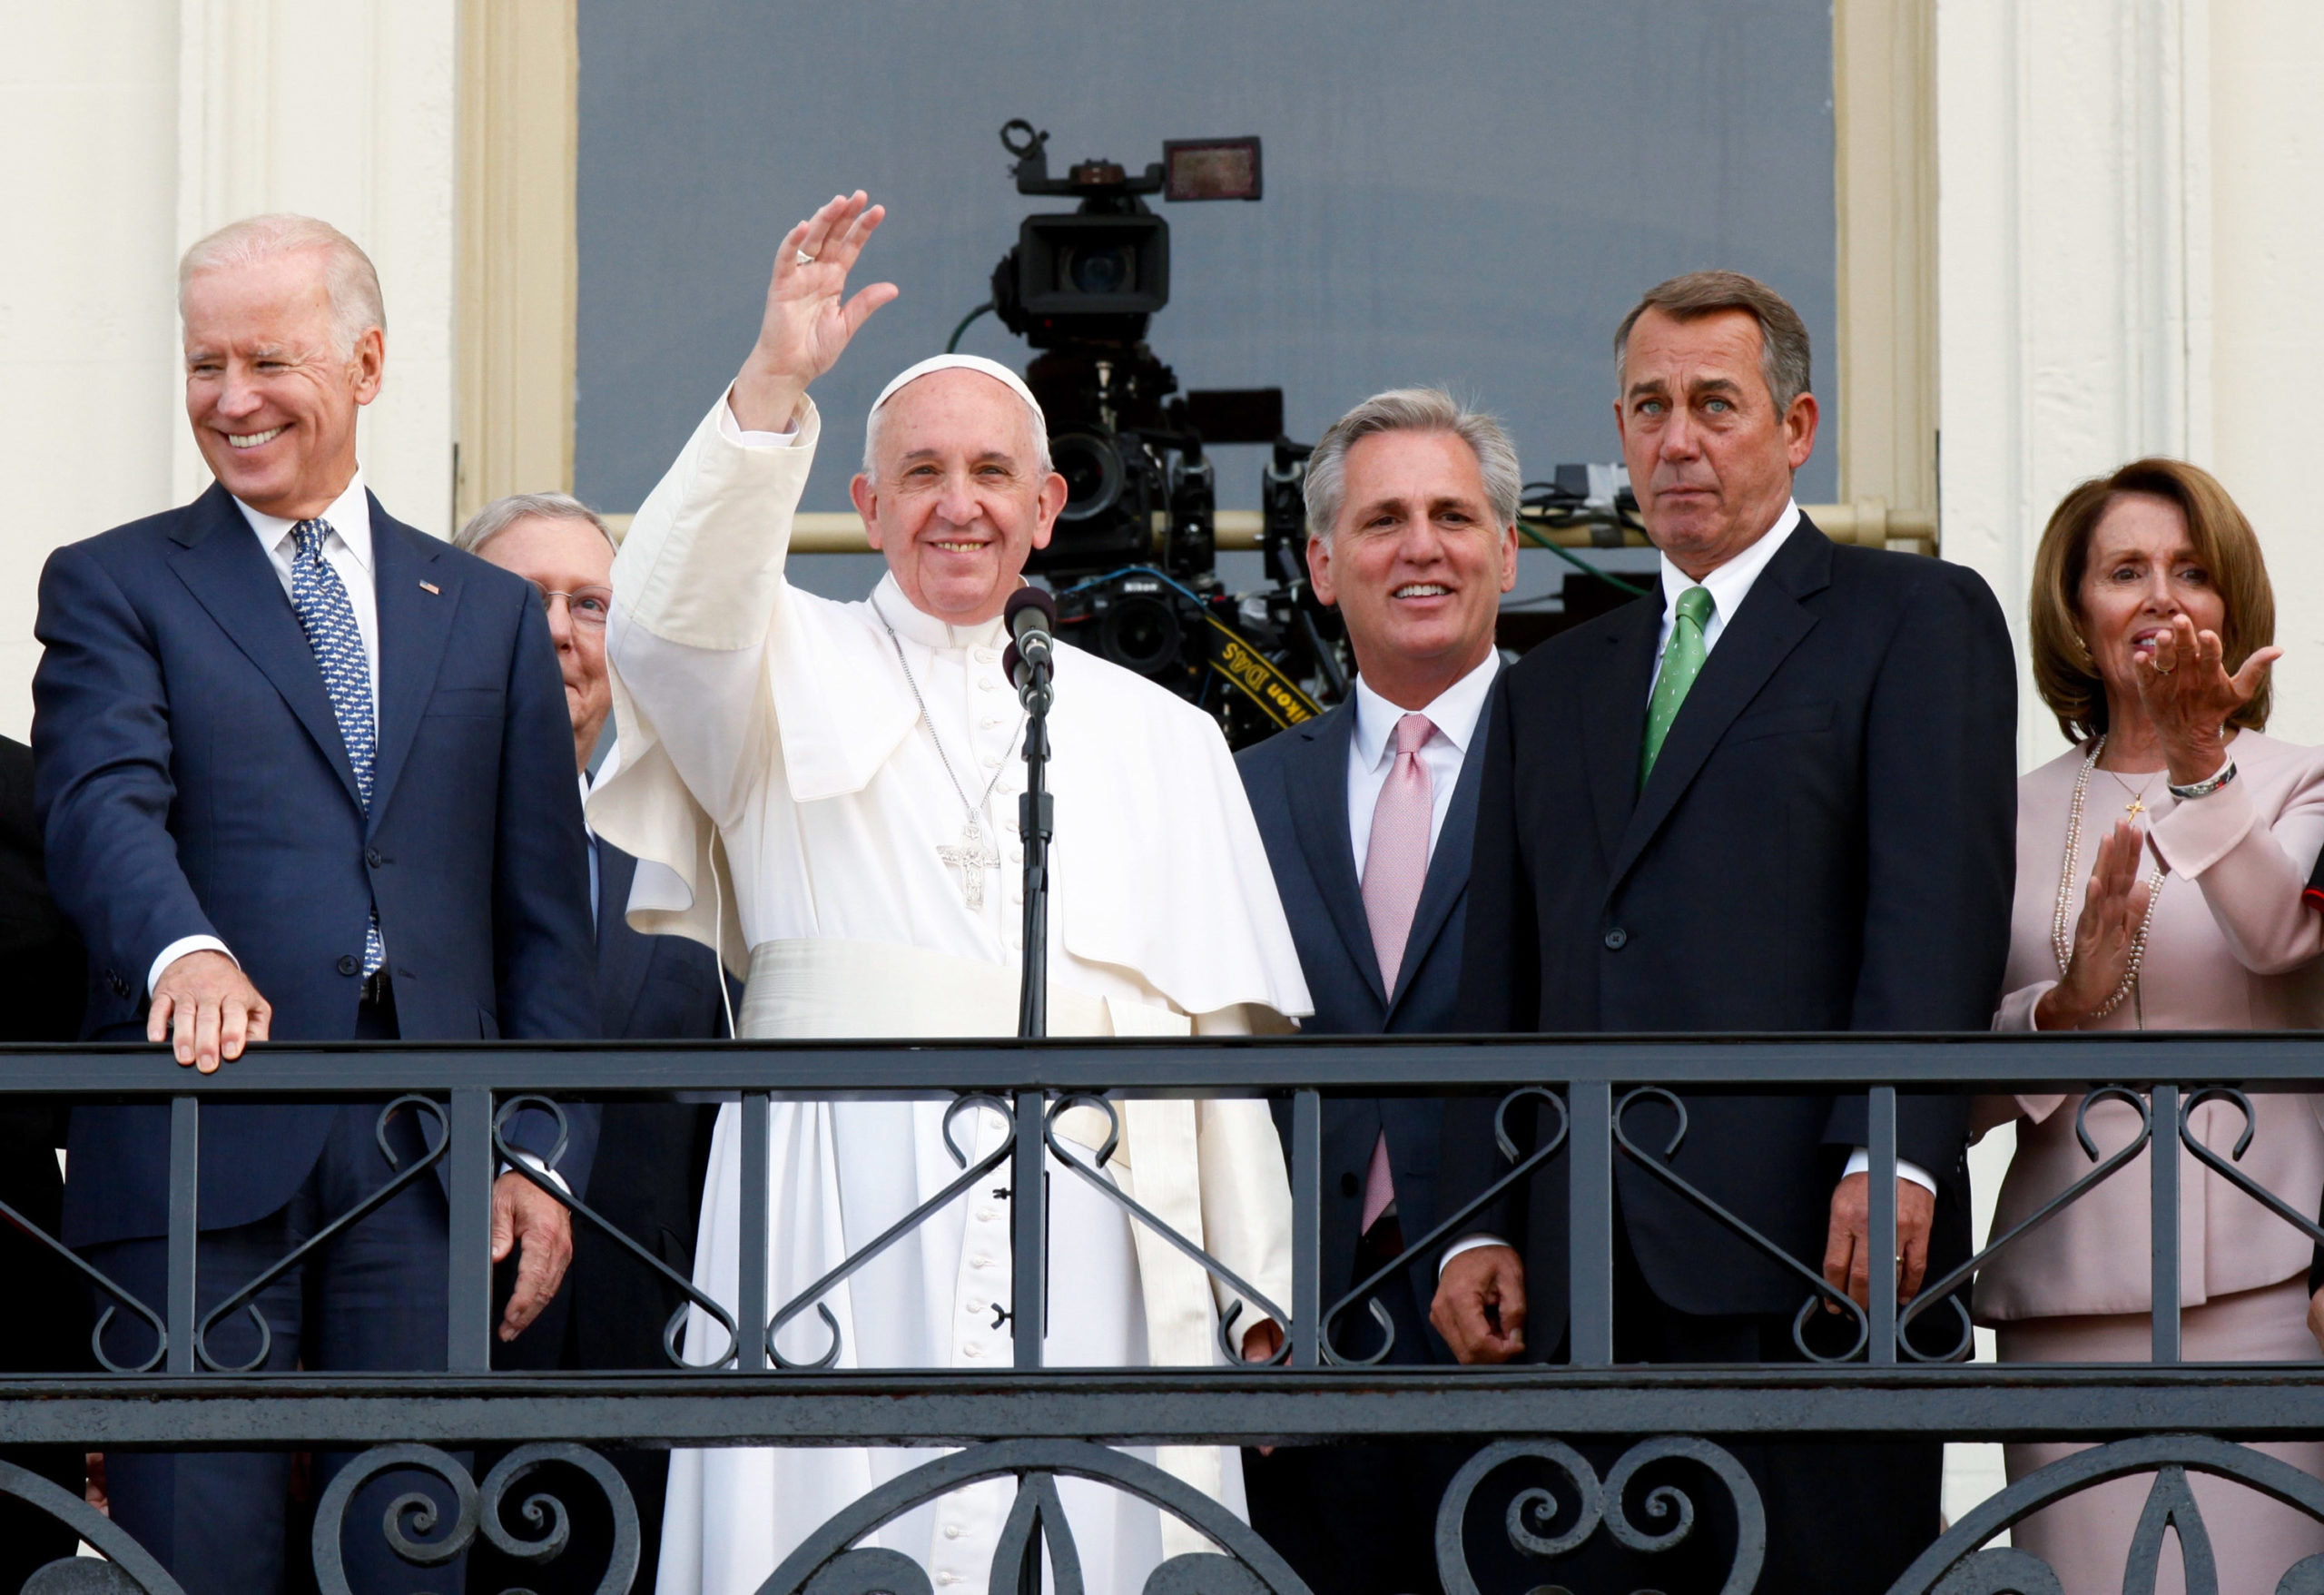 WASHINGTON, DC - SEPTEMBER 24: Pope Francis (2nd L) waves to crowd from the balcony of the US Capitol building, after his address to a joint meeting of the U.S. Congress as (L to R) U.S. Vice President Joe Biden, House Majority Leader Kevin McCarthy (R-CA), Speaker of the House John Boehner (R-OH) and House Democratic Leader Rep. Nancy Pelosi (D-CA) look on September 24, 2015 in Washington, D.C. Pope Francis, the first pope to address a joint meeting of Congress, will finish his tour of Washington later today before traveling to New York City. (Photo by Evy Mages/Getty Images)